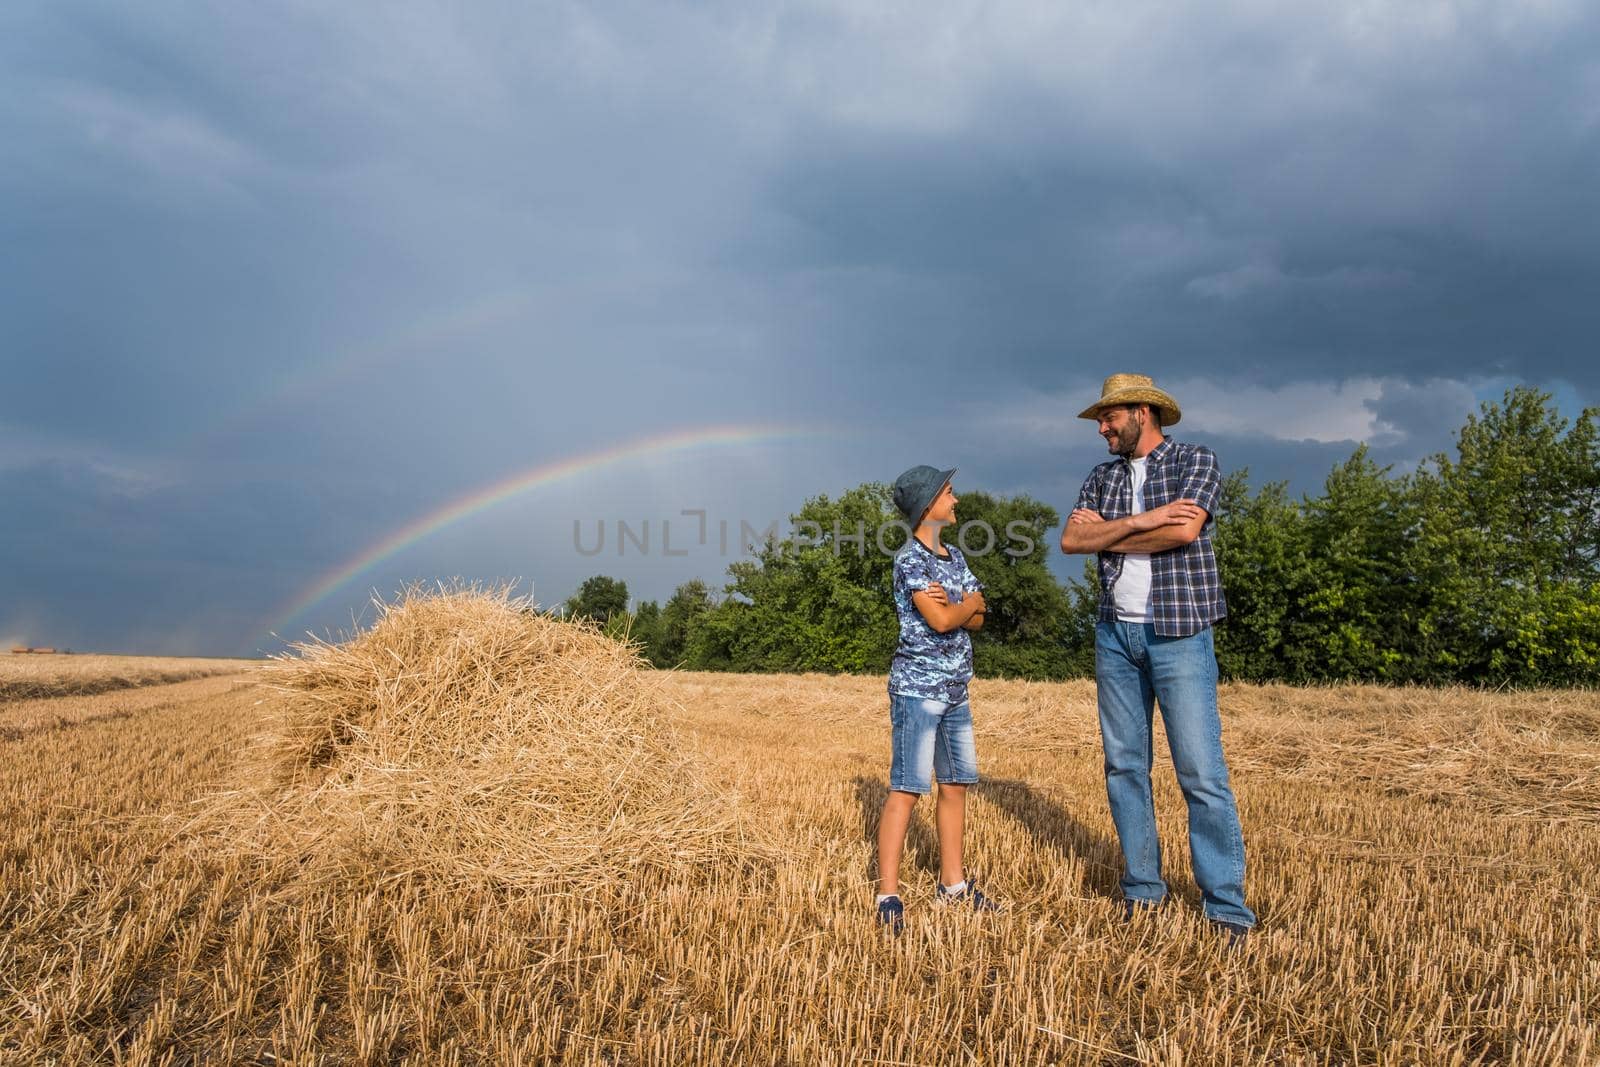 Father and son are standing in their wheat field after successful harvest. Rainbow in the sky behind them.